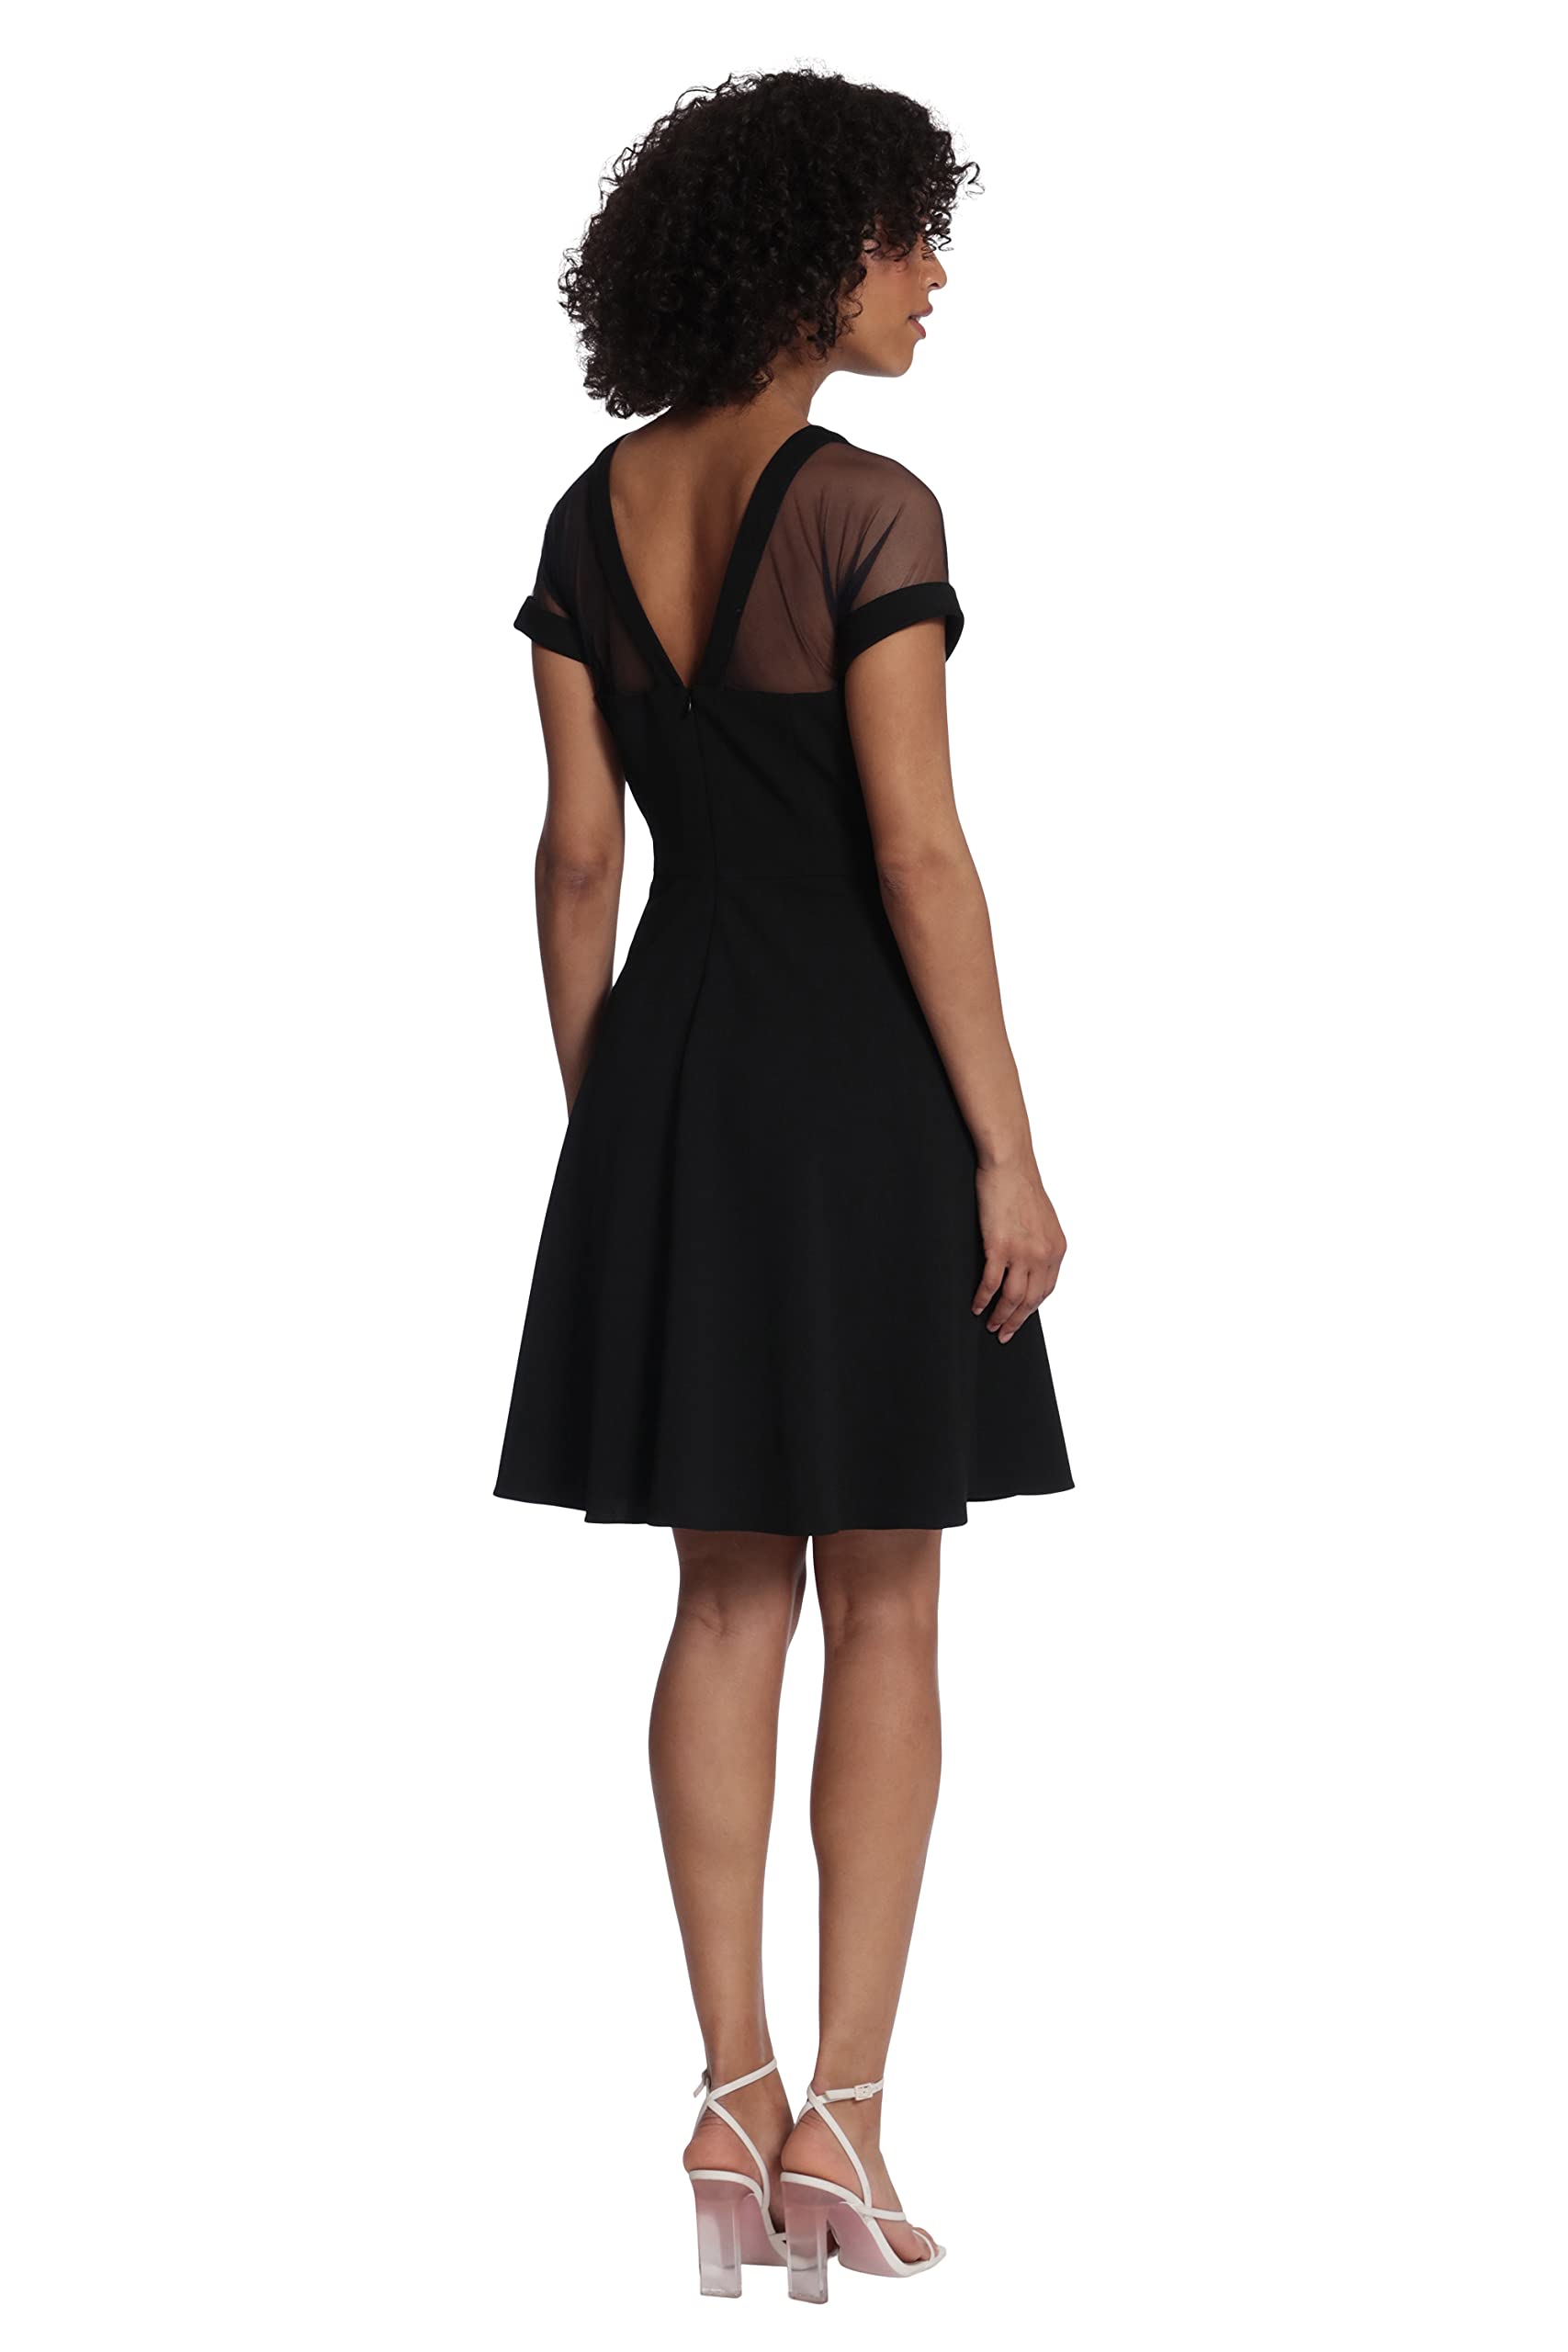 Maggy London Women's Illusion Dress Occasion Event Party Holiday Cocktail Guest of Wedding